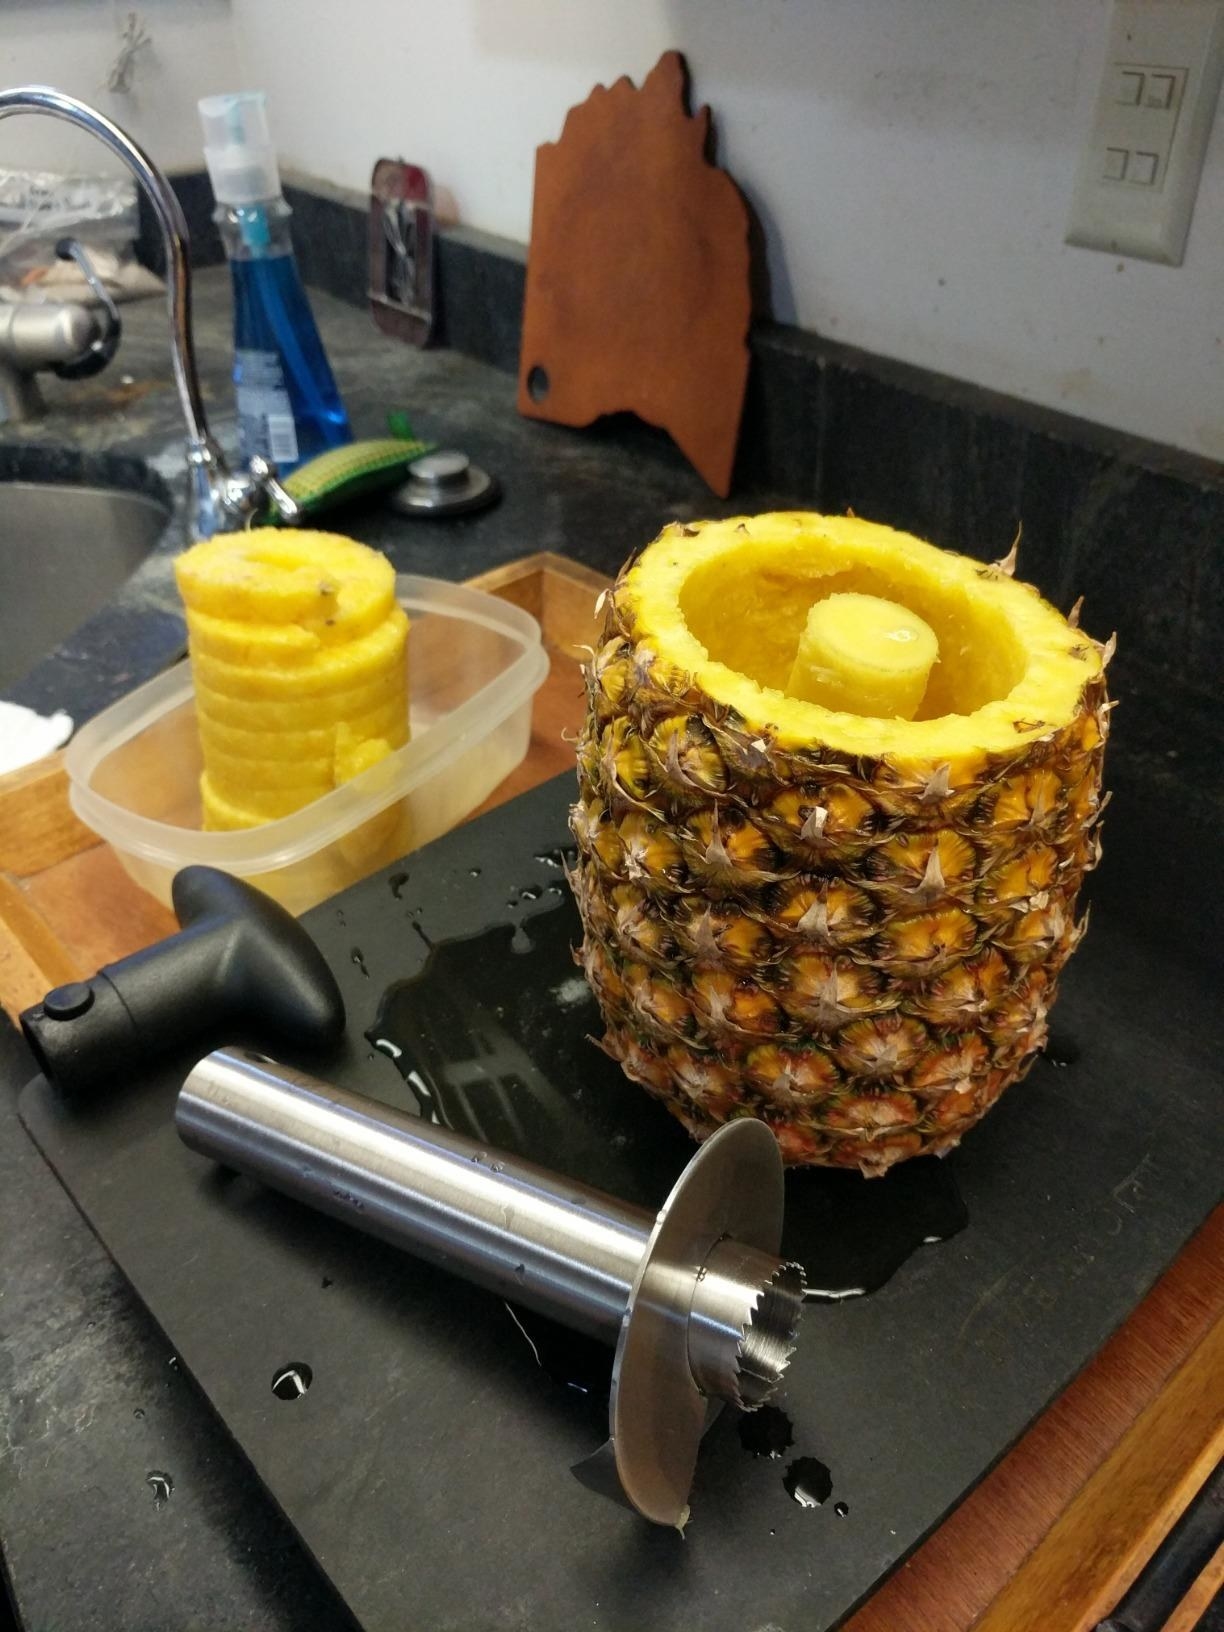 A reviewer&#x27;s counter with the tool, a cored pineapple exterior, and the spiraled fruit in a container